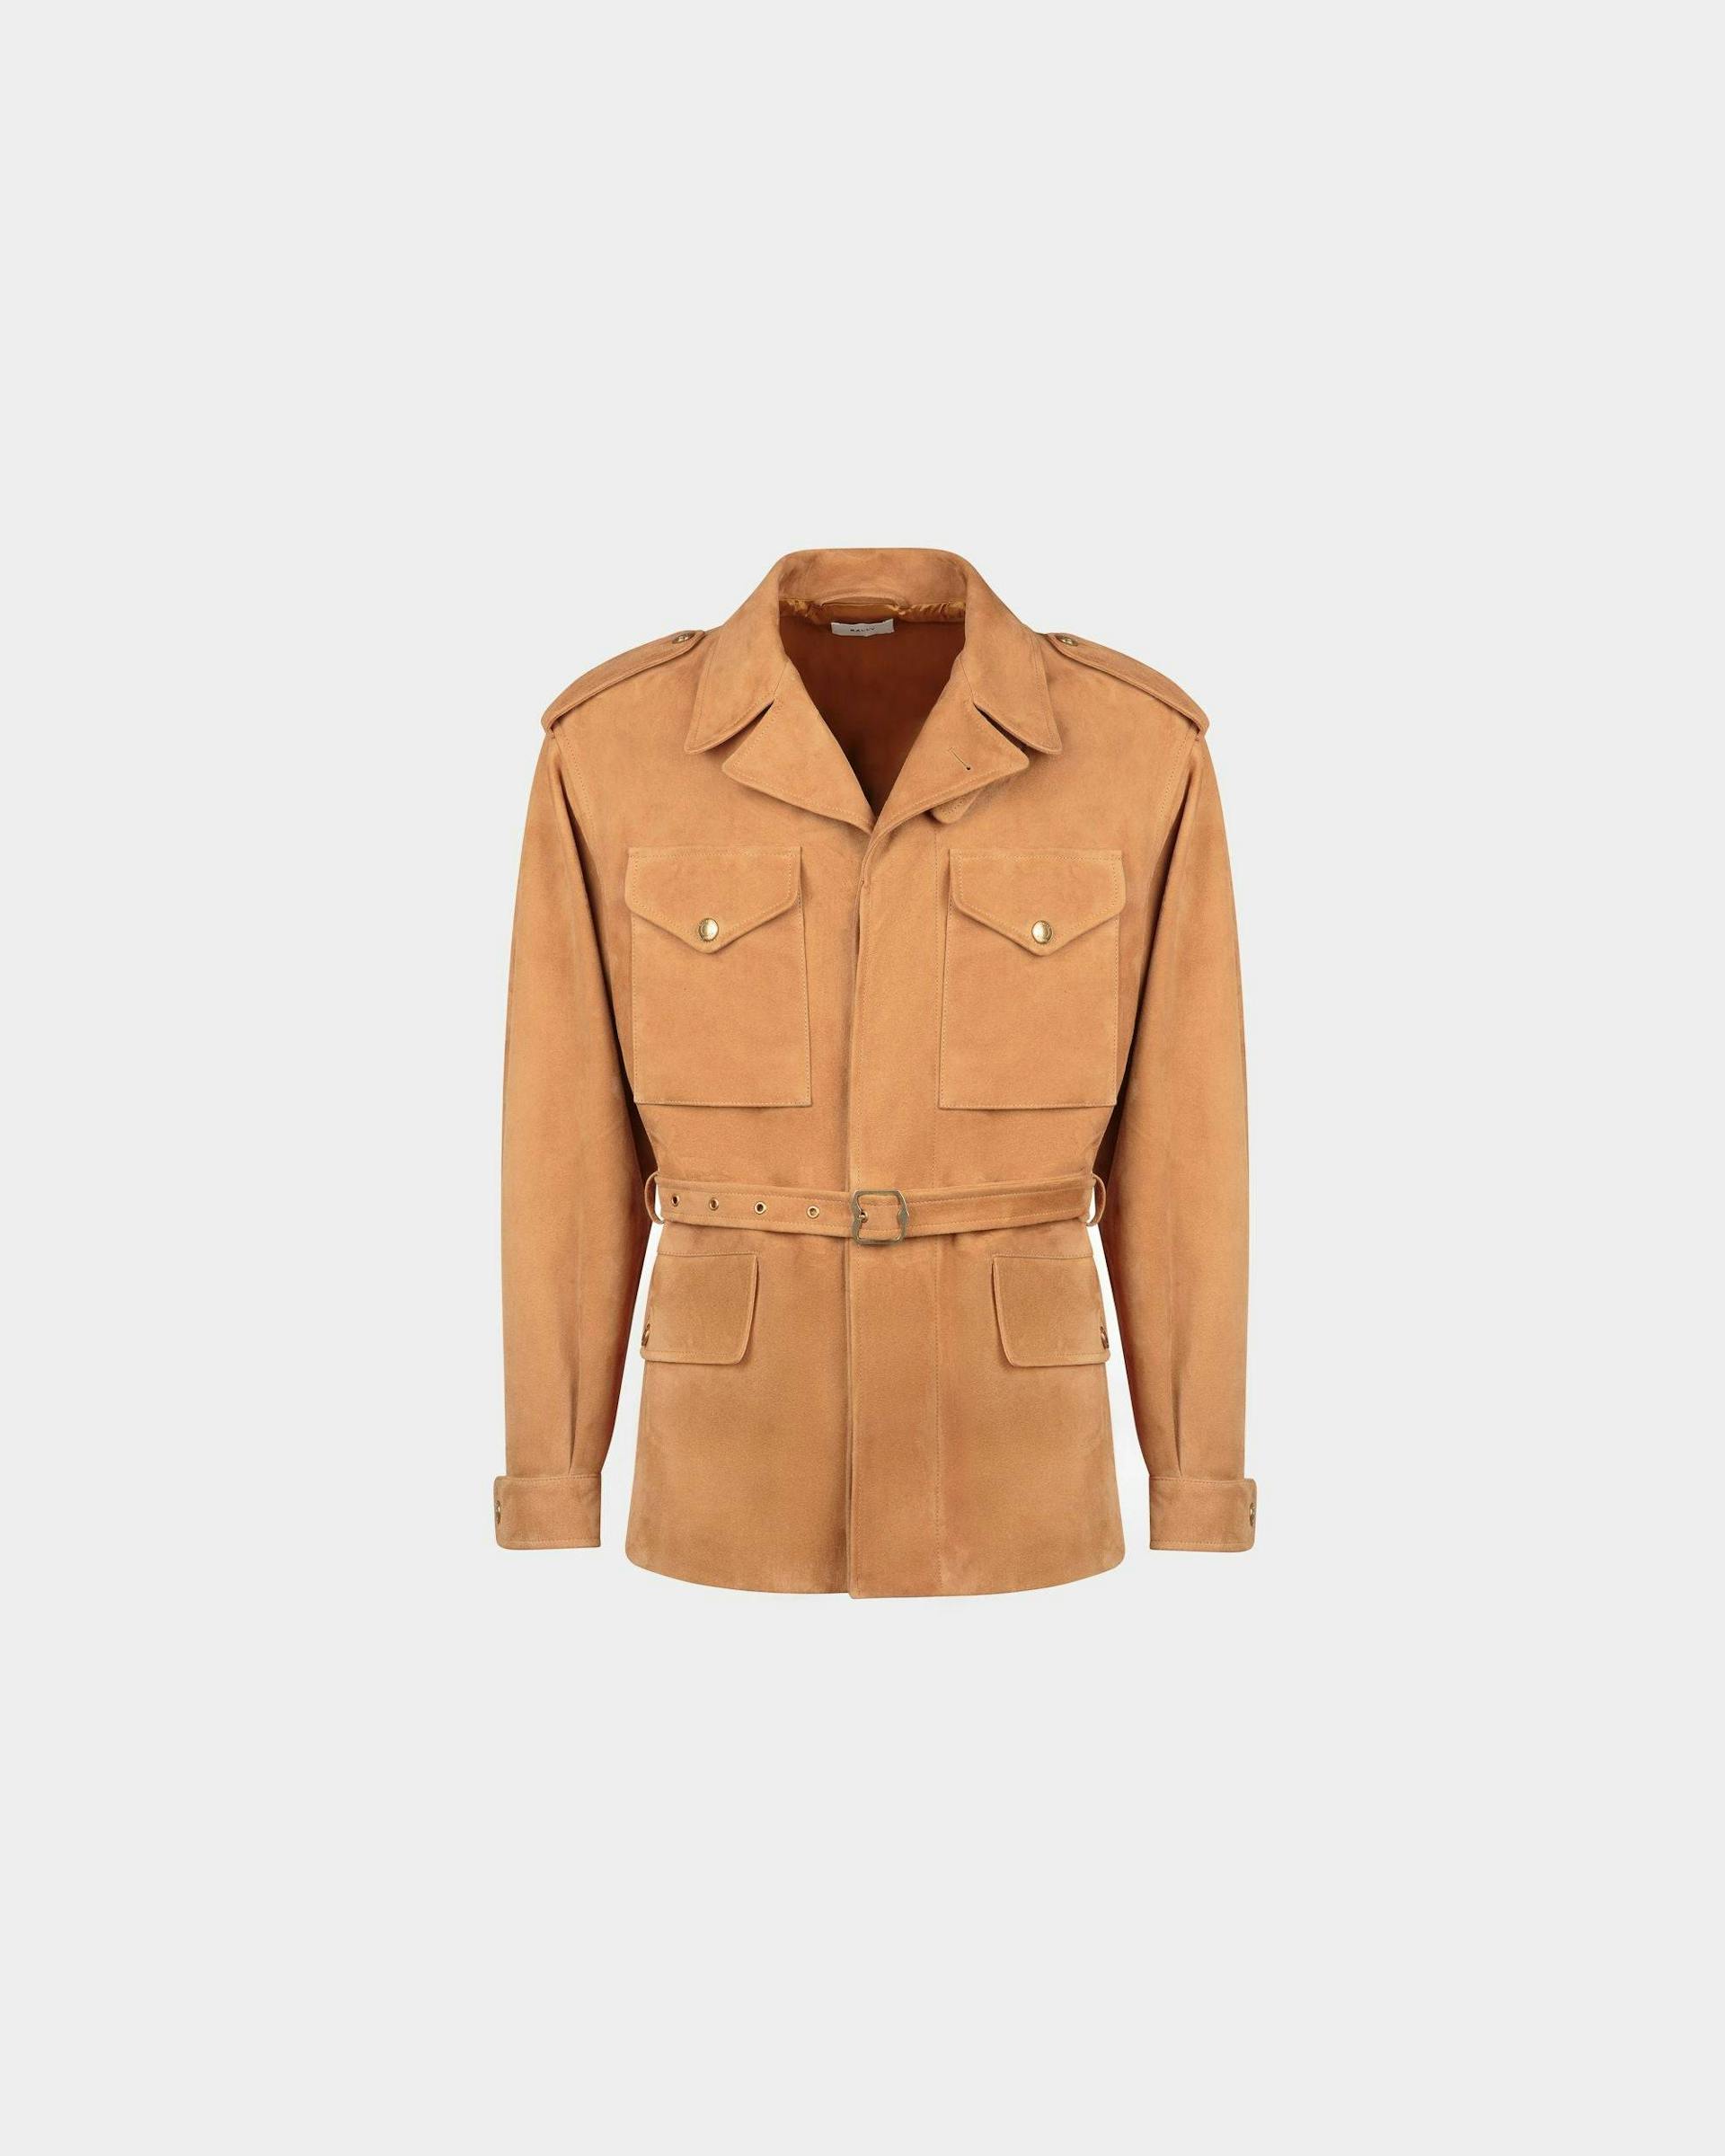 Men's Jacket in Suede | Bally | Still Life Front